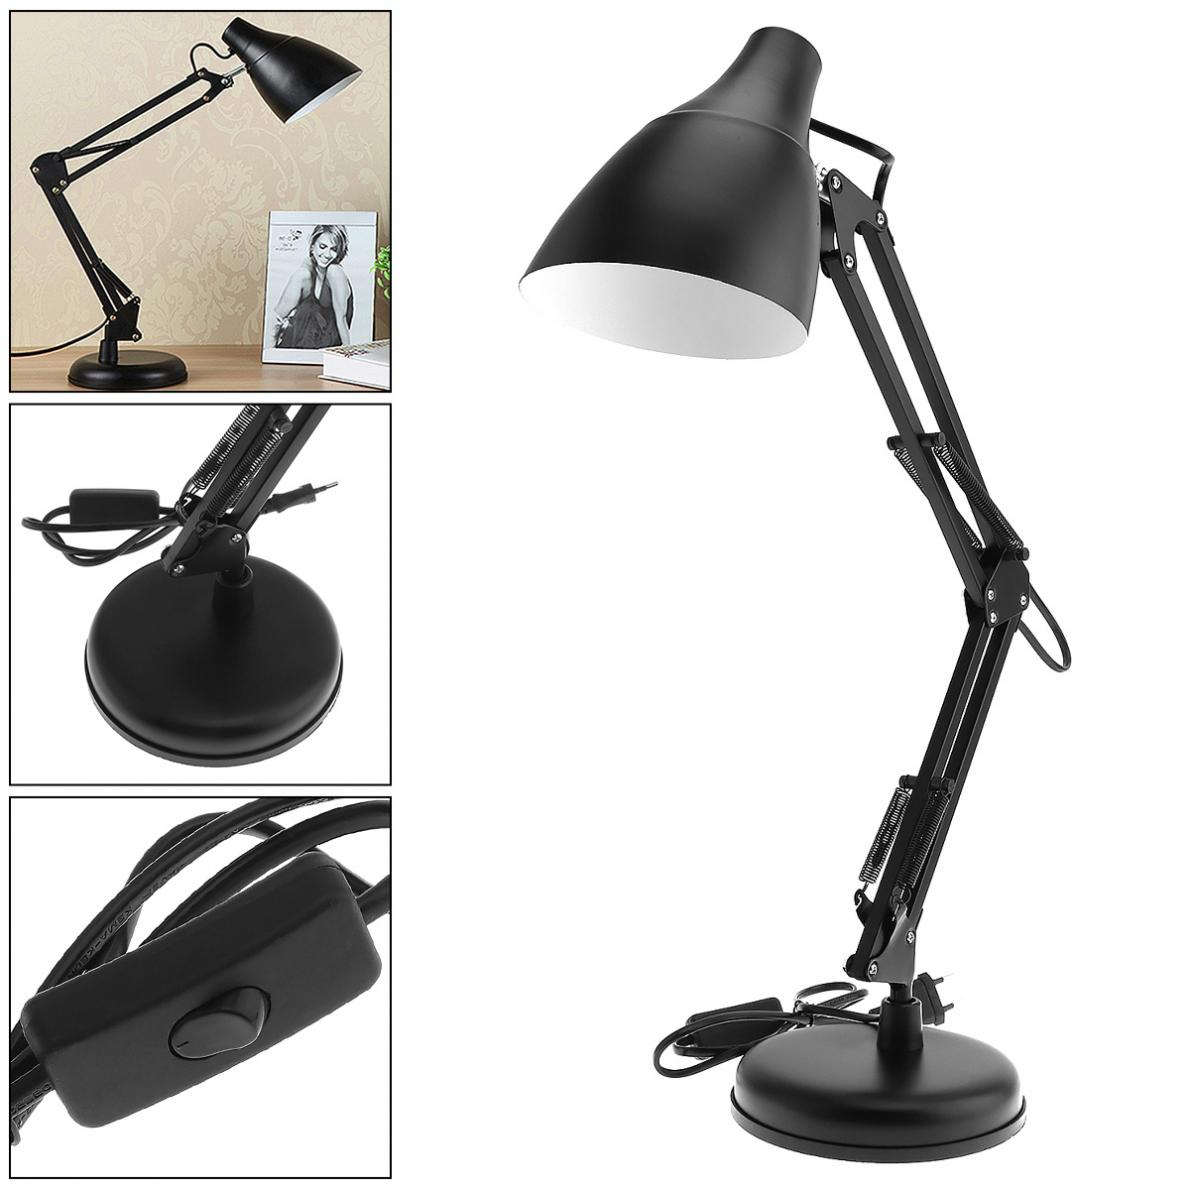 2019 Black Desk Lamp E27 Flexible Swing Arm Table Reading Light Lamp W Light Base Mount Clip 360 Rotation For Office Home Bedroom From Stylenew throughout dimensions 1190 X 1190